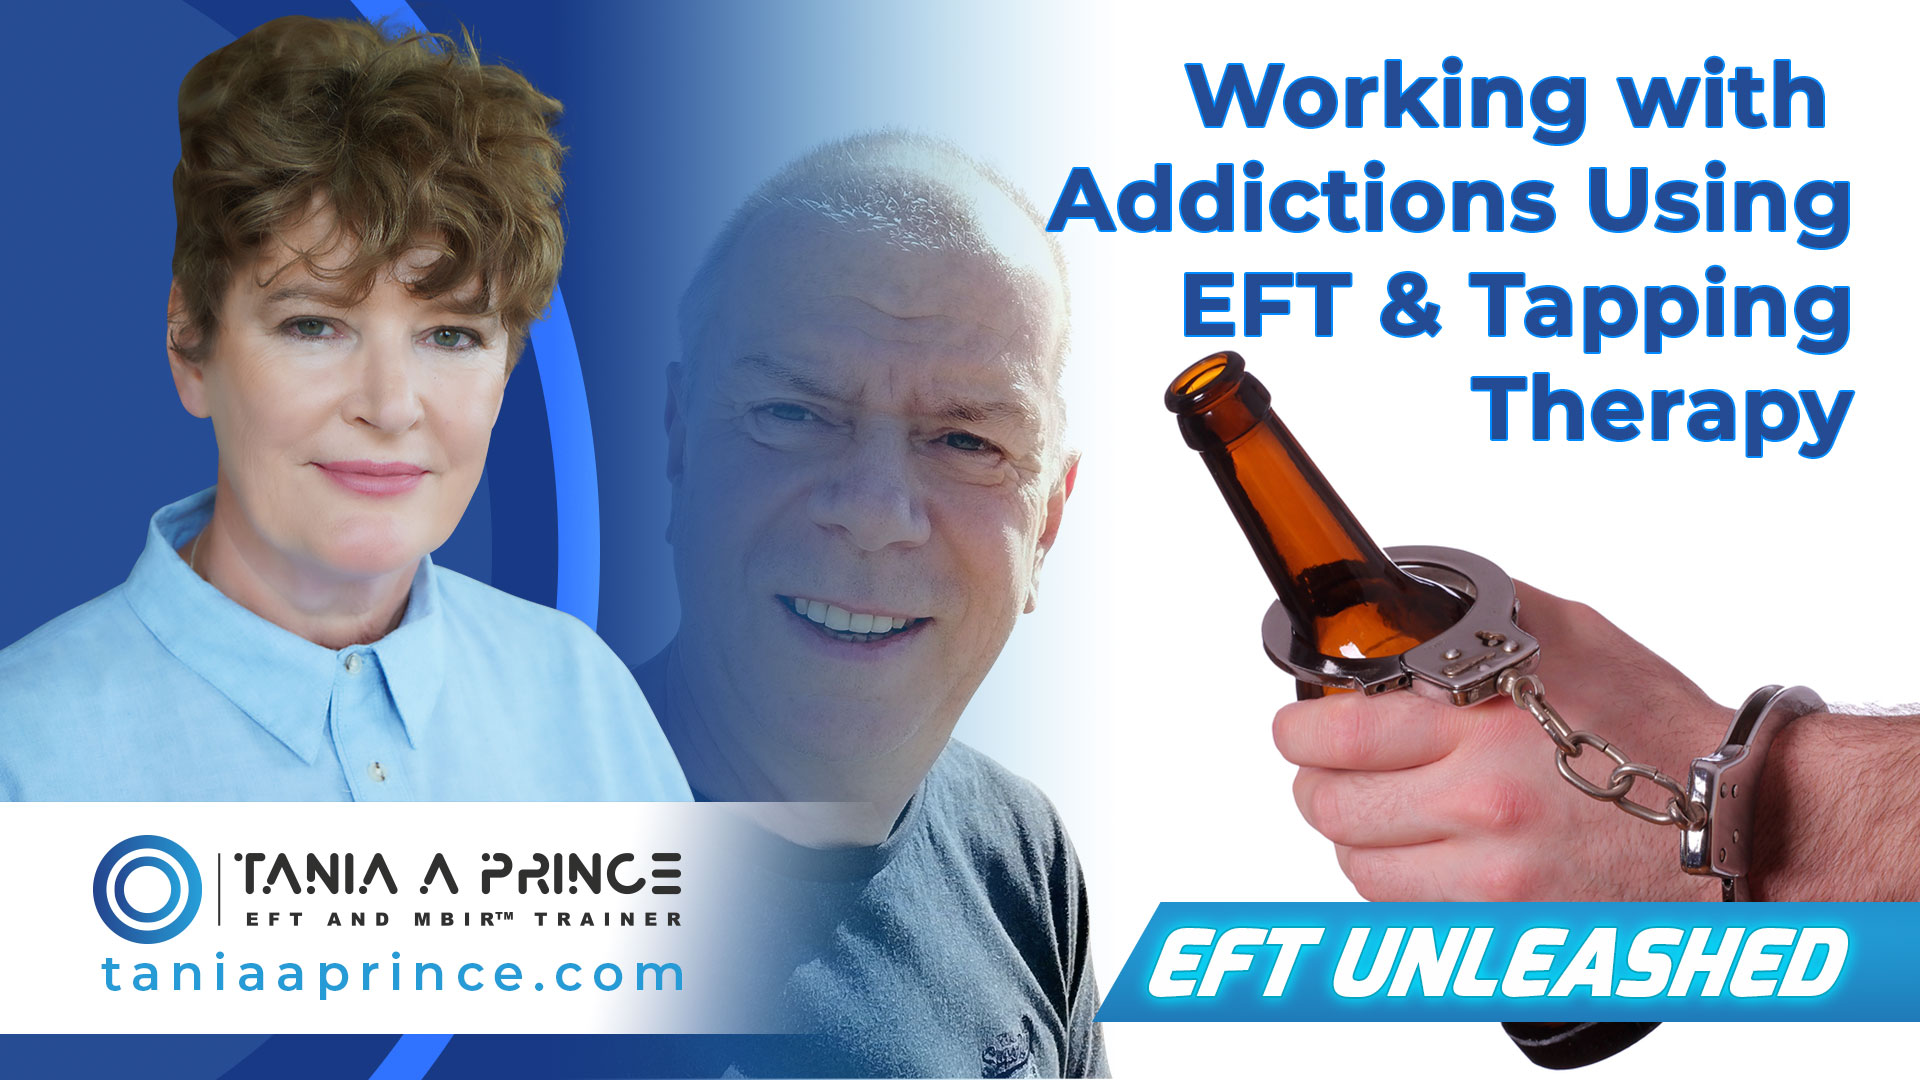 Working with addiction using EFT